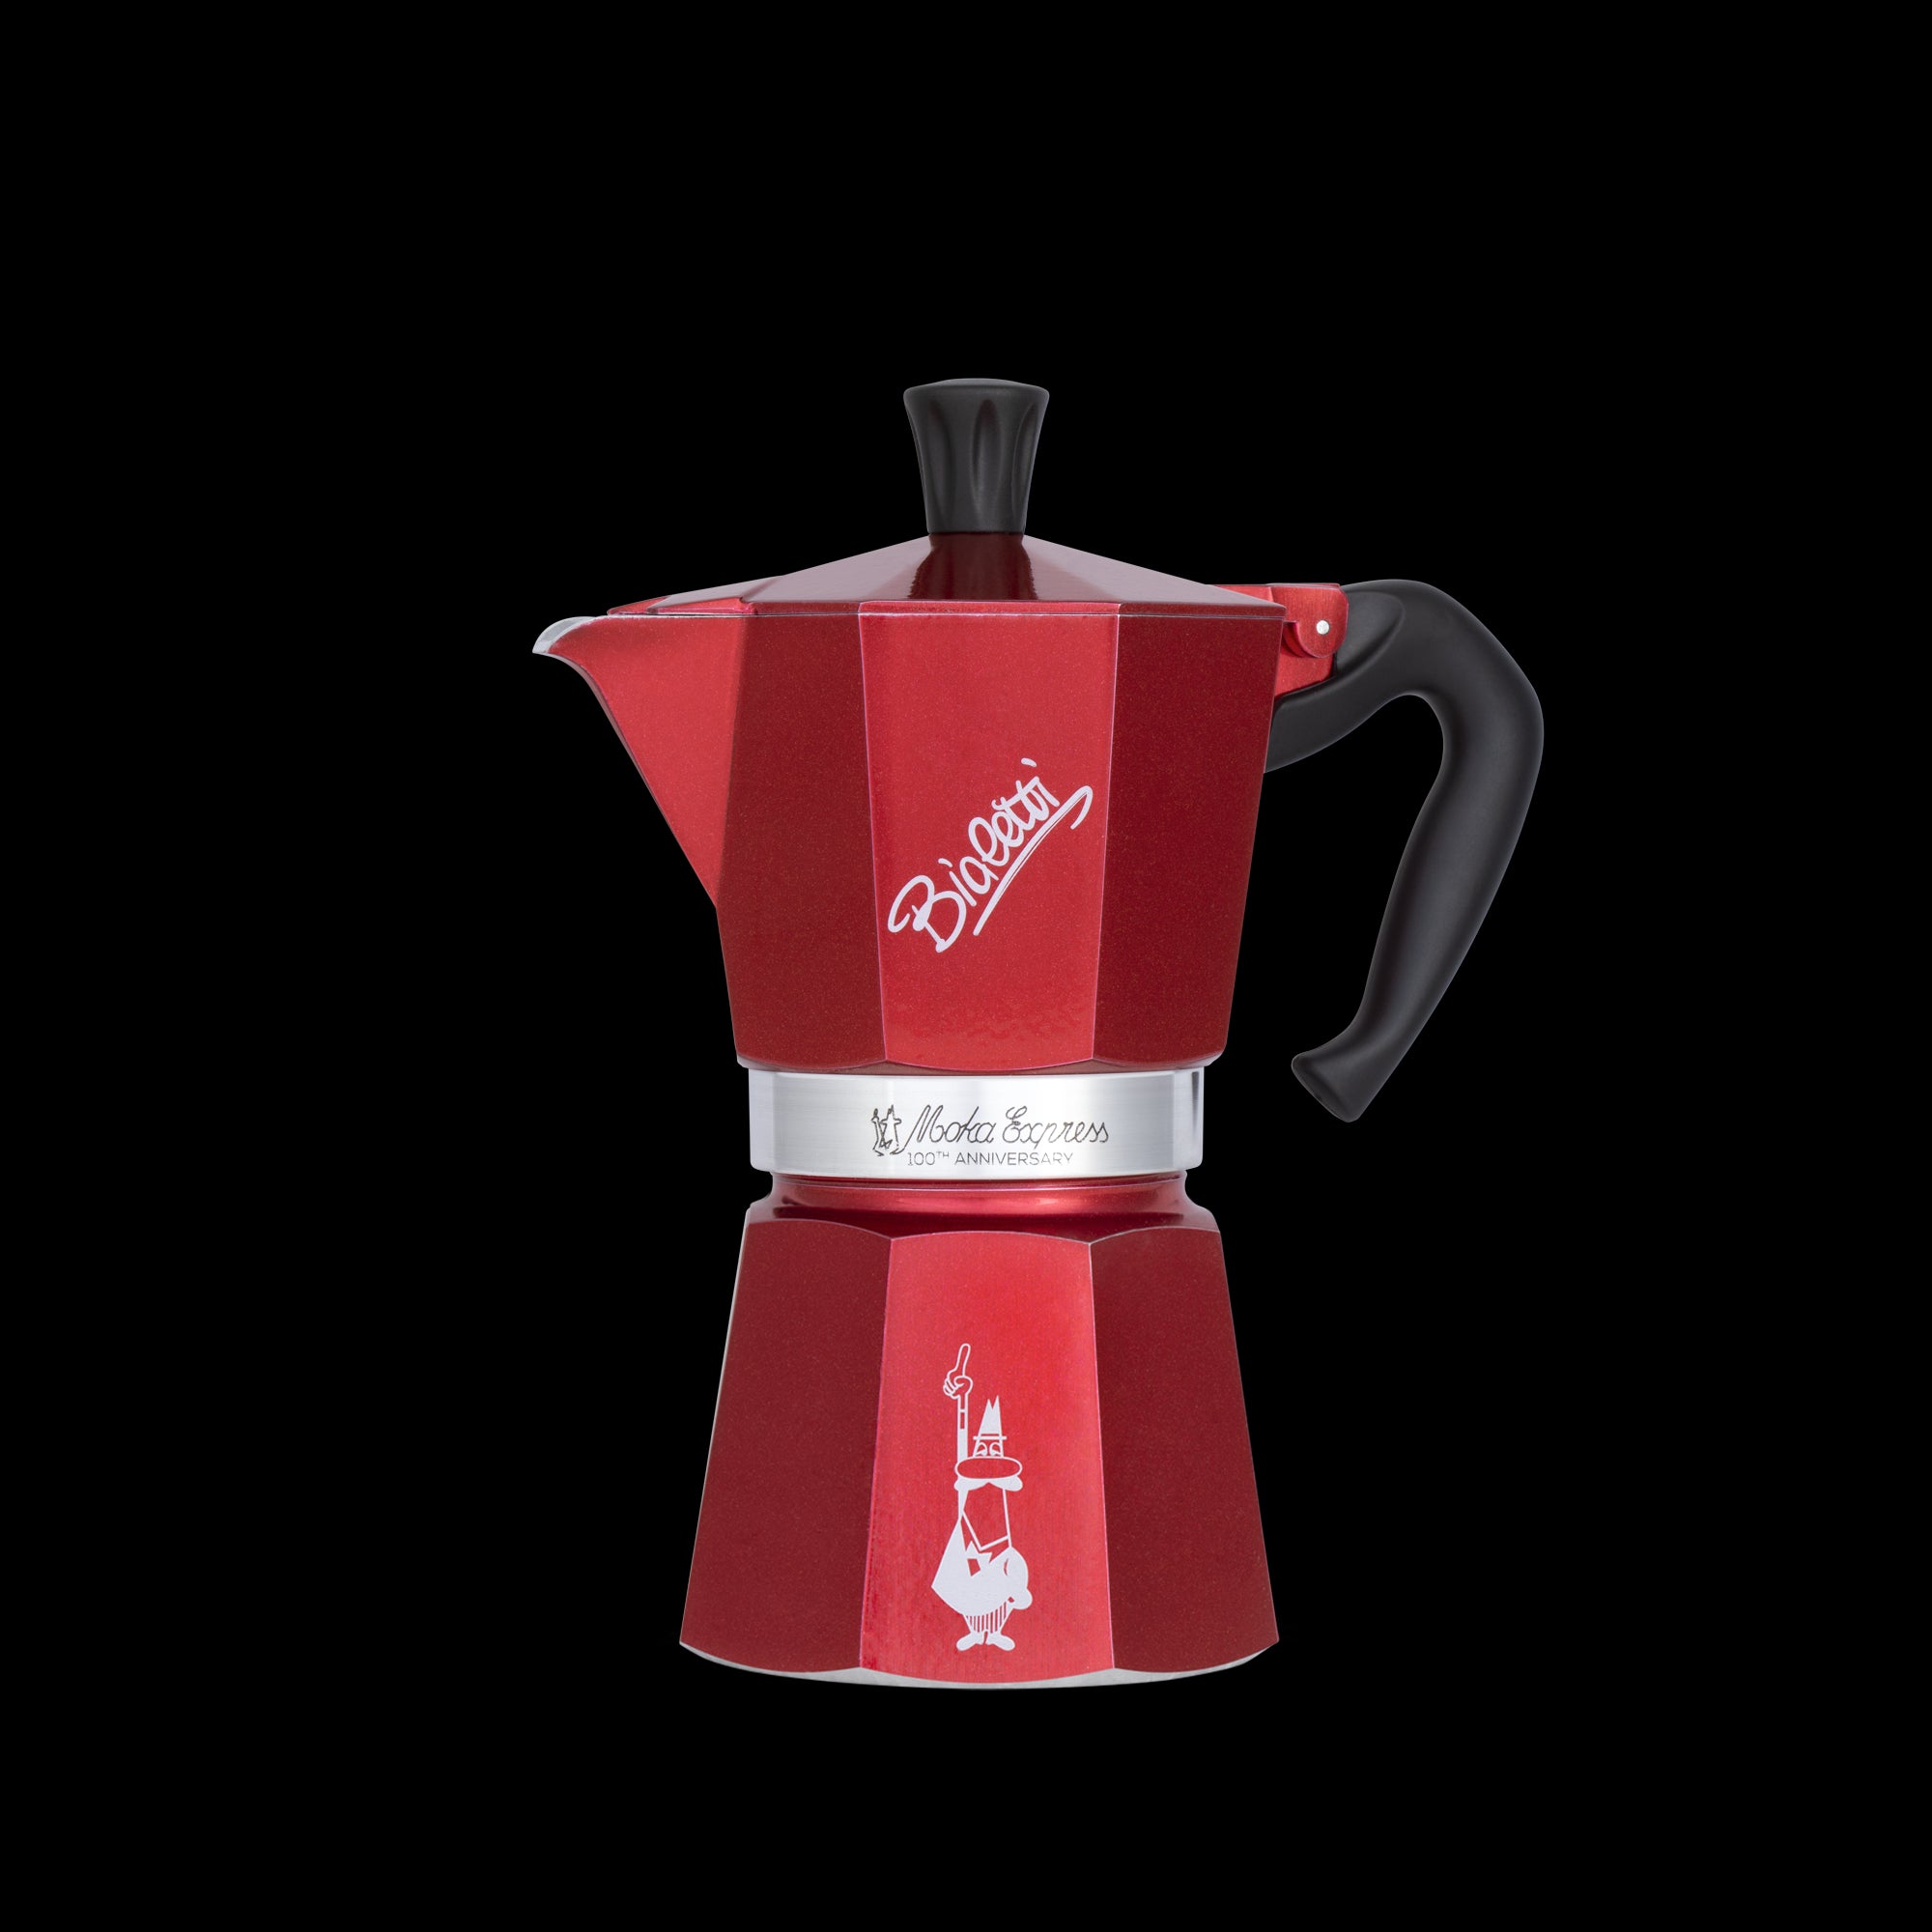 Bialetti 6 Cup Express 100th Anniversary Red - Consiglioskitchenware.com- USA